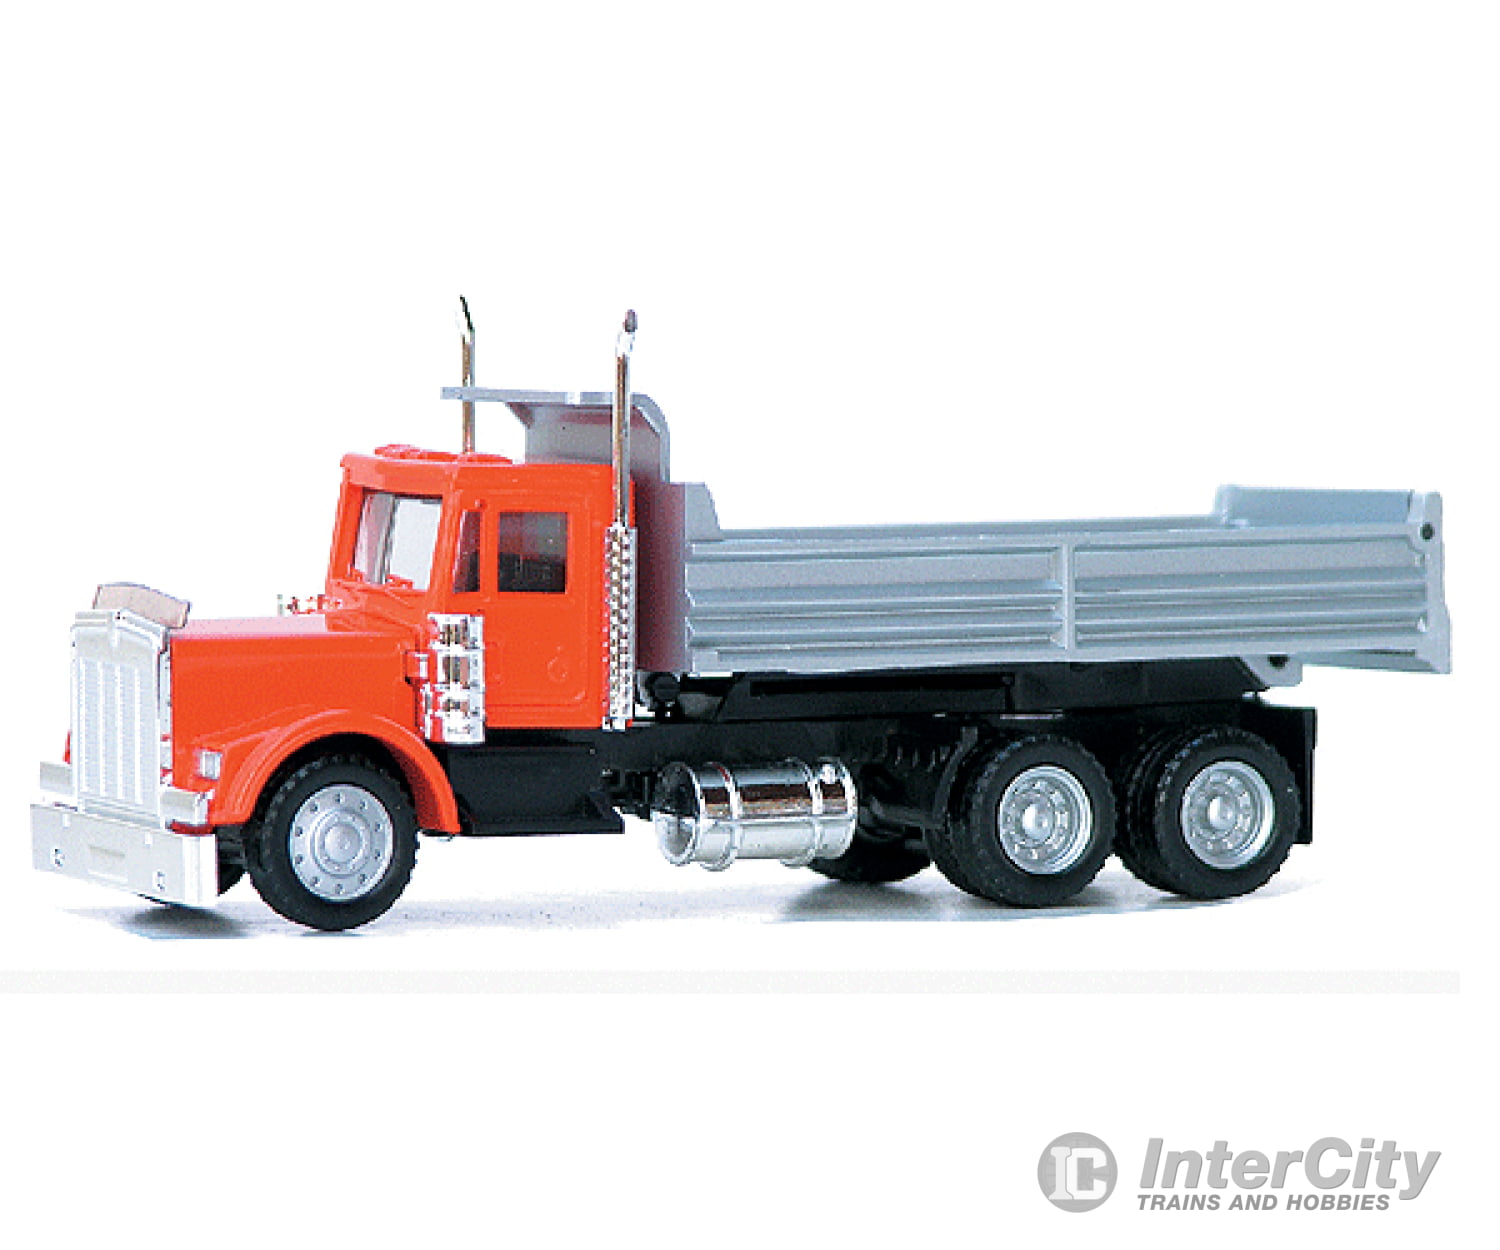 Herpa Models Ho 6252 Kenworth Conventional Cab/Chassis Heavy Haul Dump Truck - Assembled -- Colors